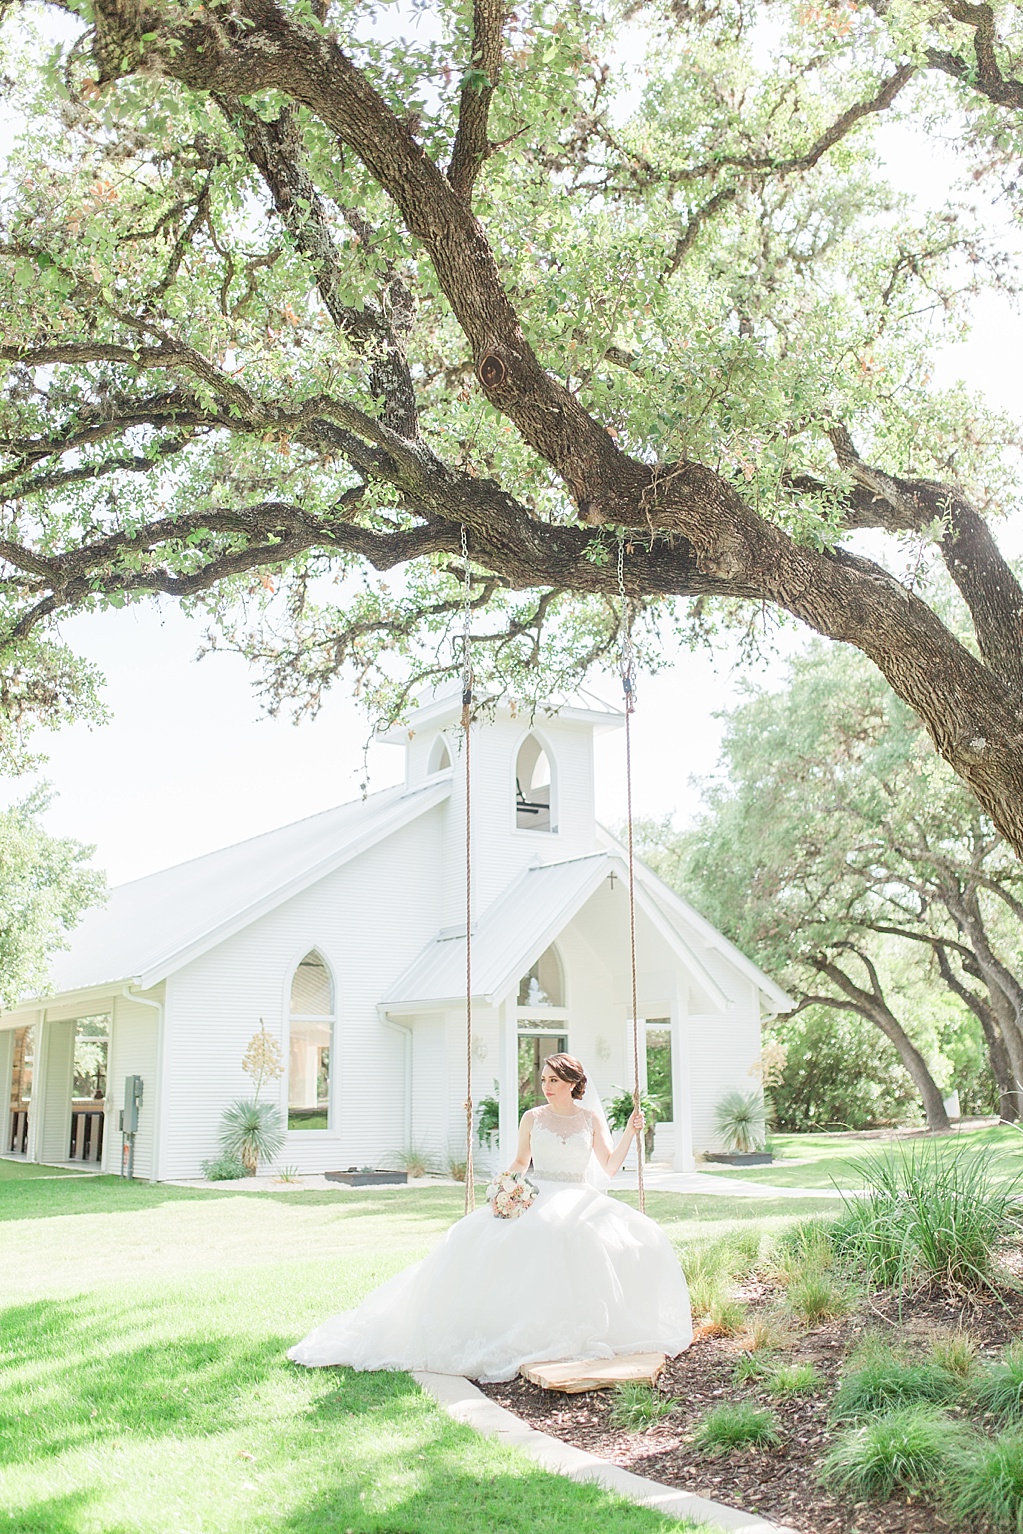 A Summer Bridal Photo Session at The Chandelier of Gruene in New Braunfels Texas By Allison Jeffers Wedding Photography 0006